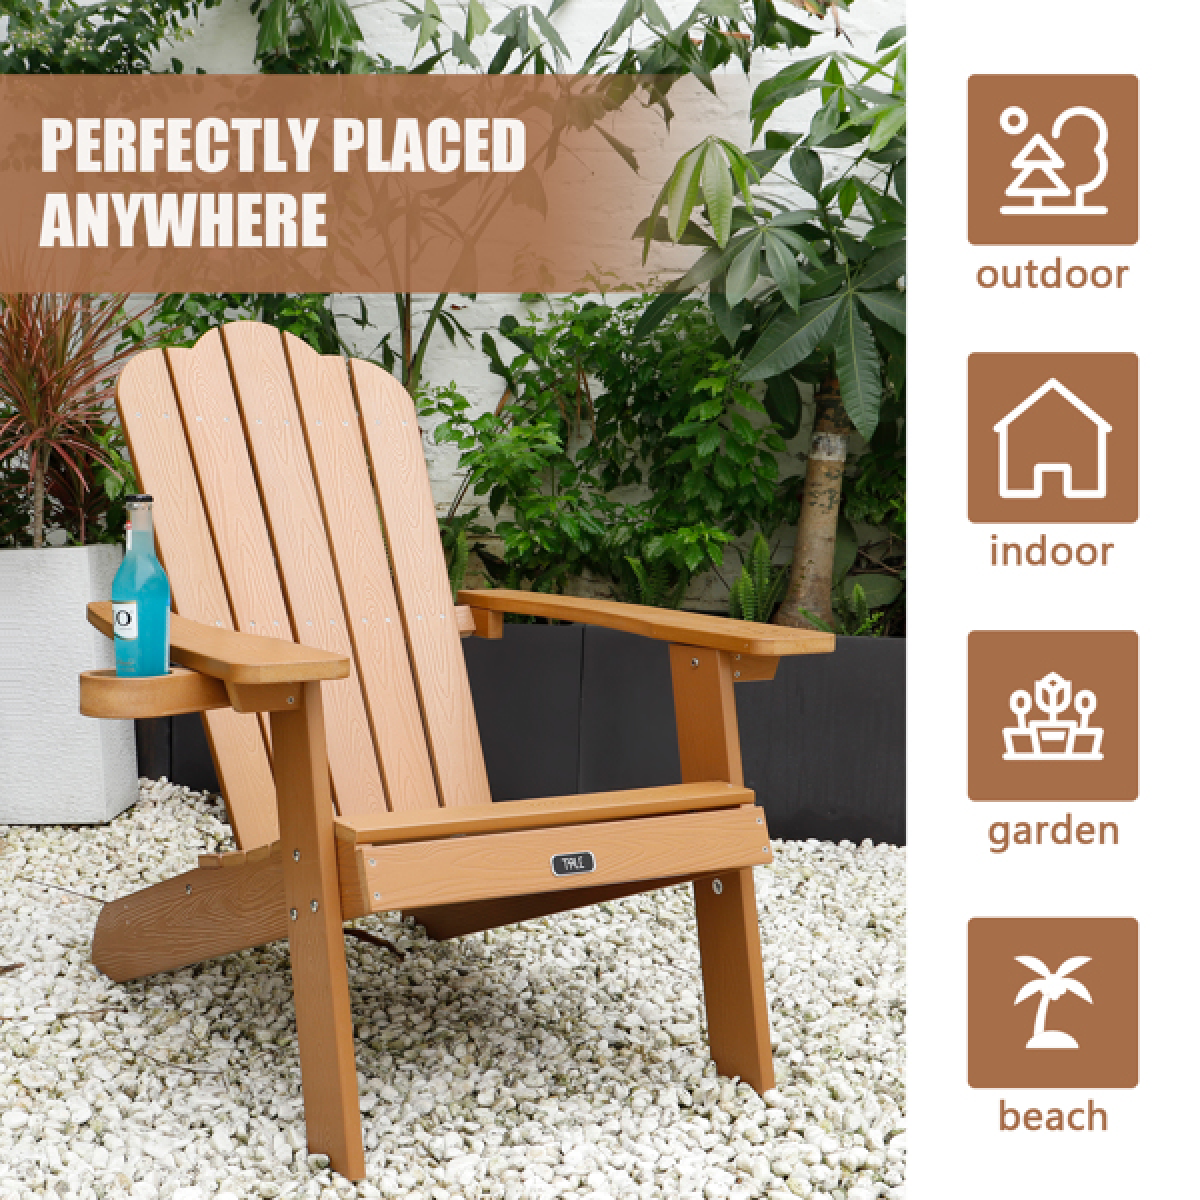 [Quick Delivery] Adirondack Chair, Outdoor Weather Resistant 380 lbs Capacity Load Plastic Patio Chairs for Pool Patio Deck Garden, Backyard Polystyrene Adirondack Chair,Brown - image 2 of 14